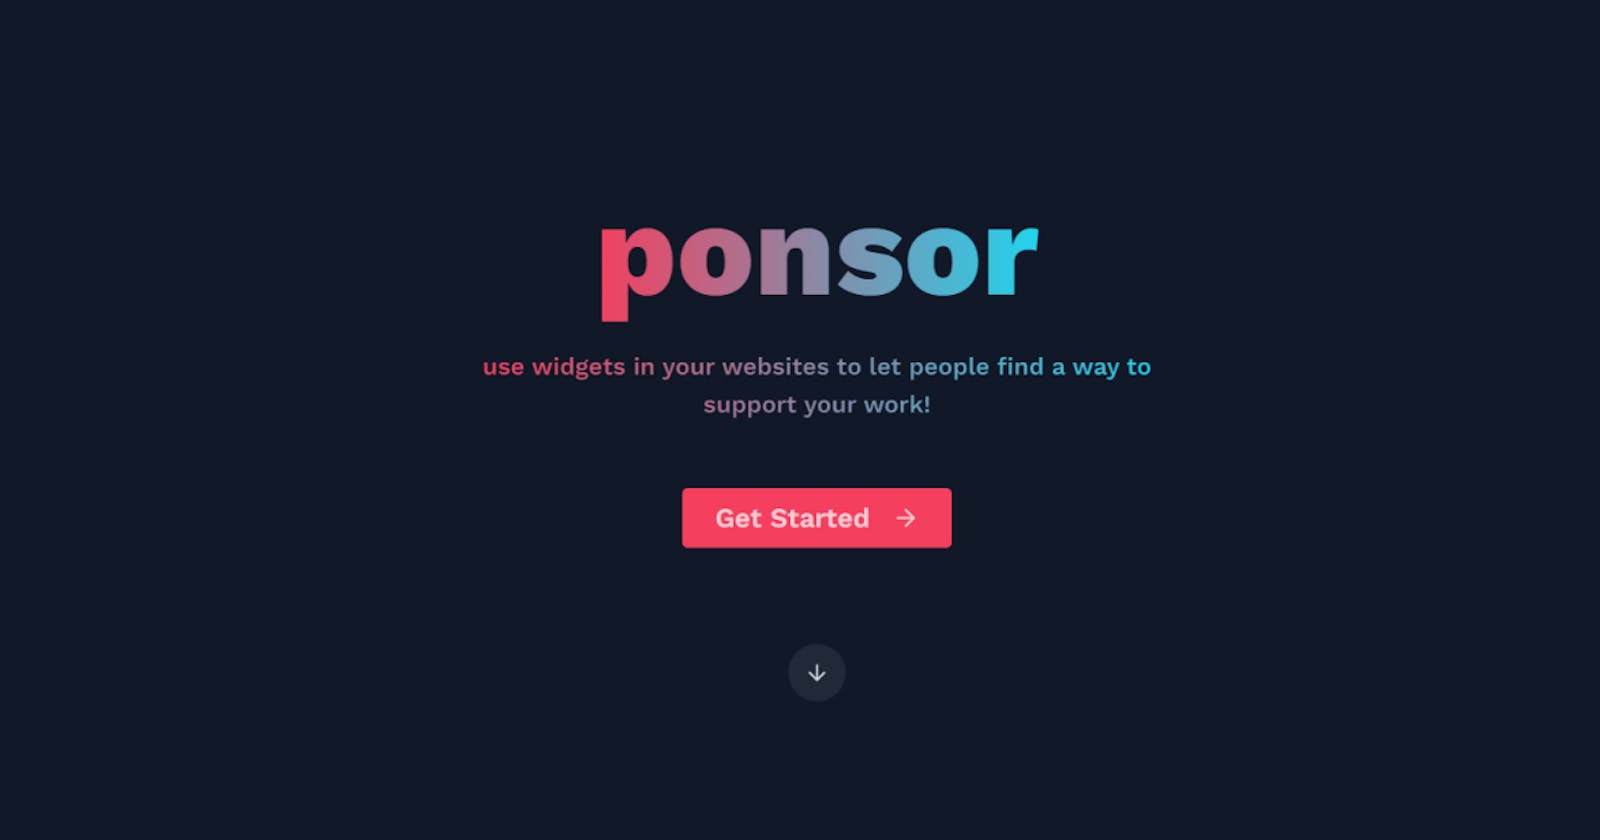 Introducing Ponsor: Getting sponsored made easy with widgets!